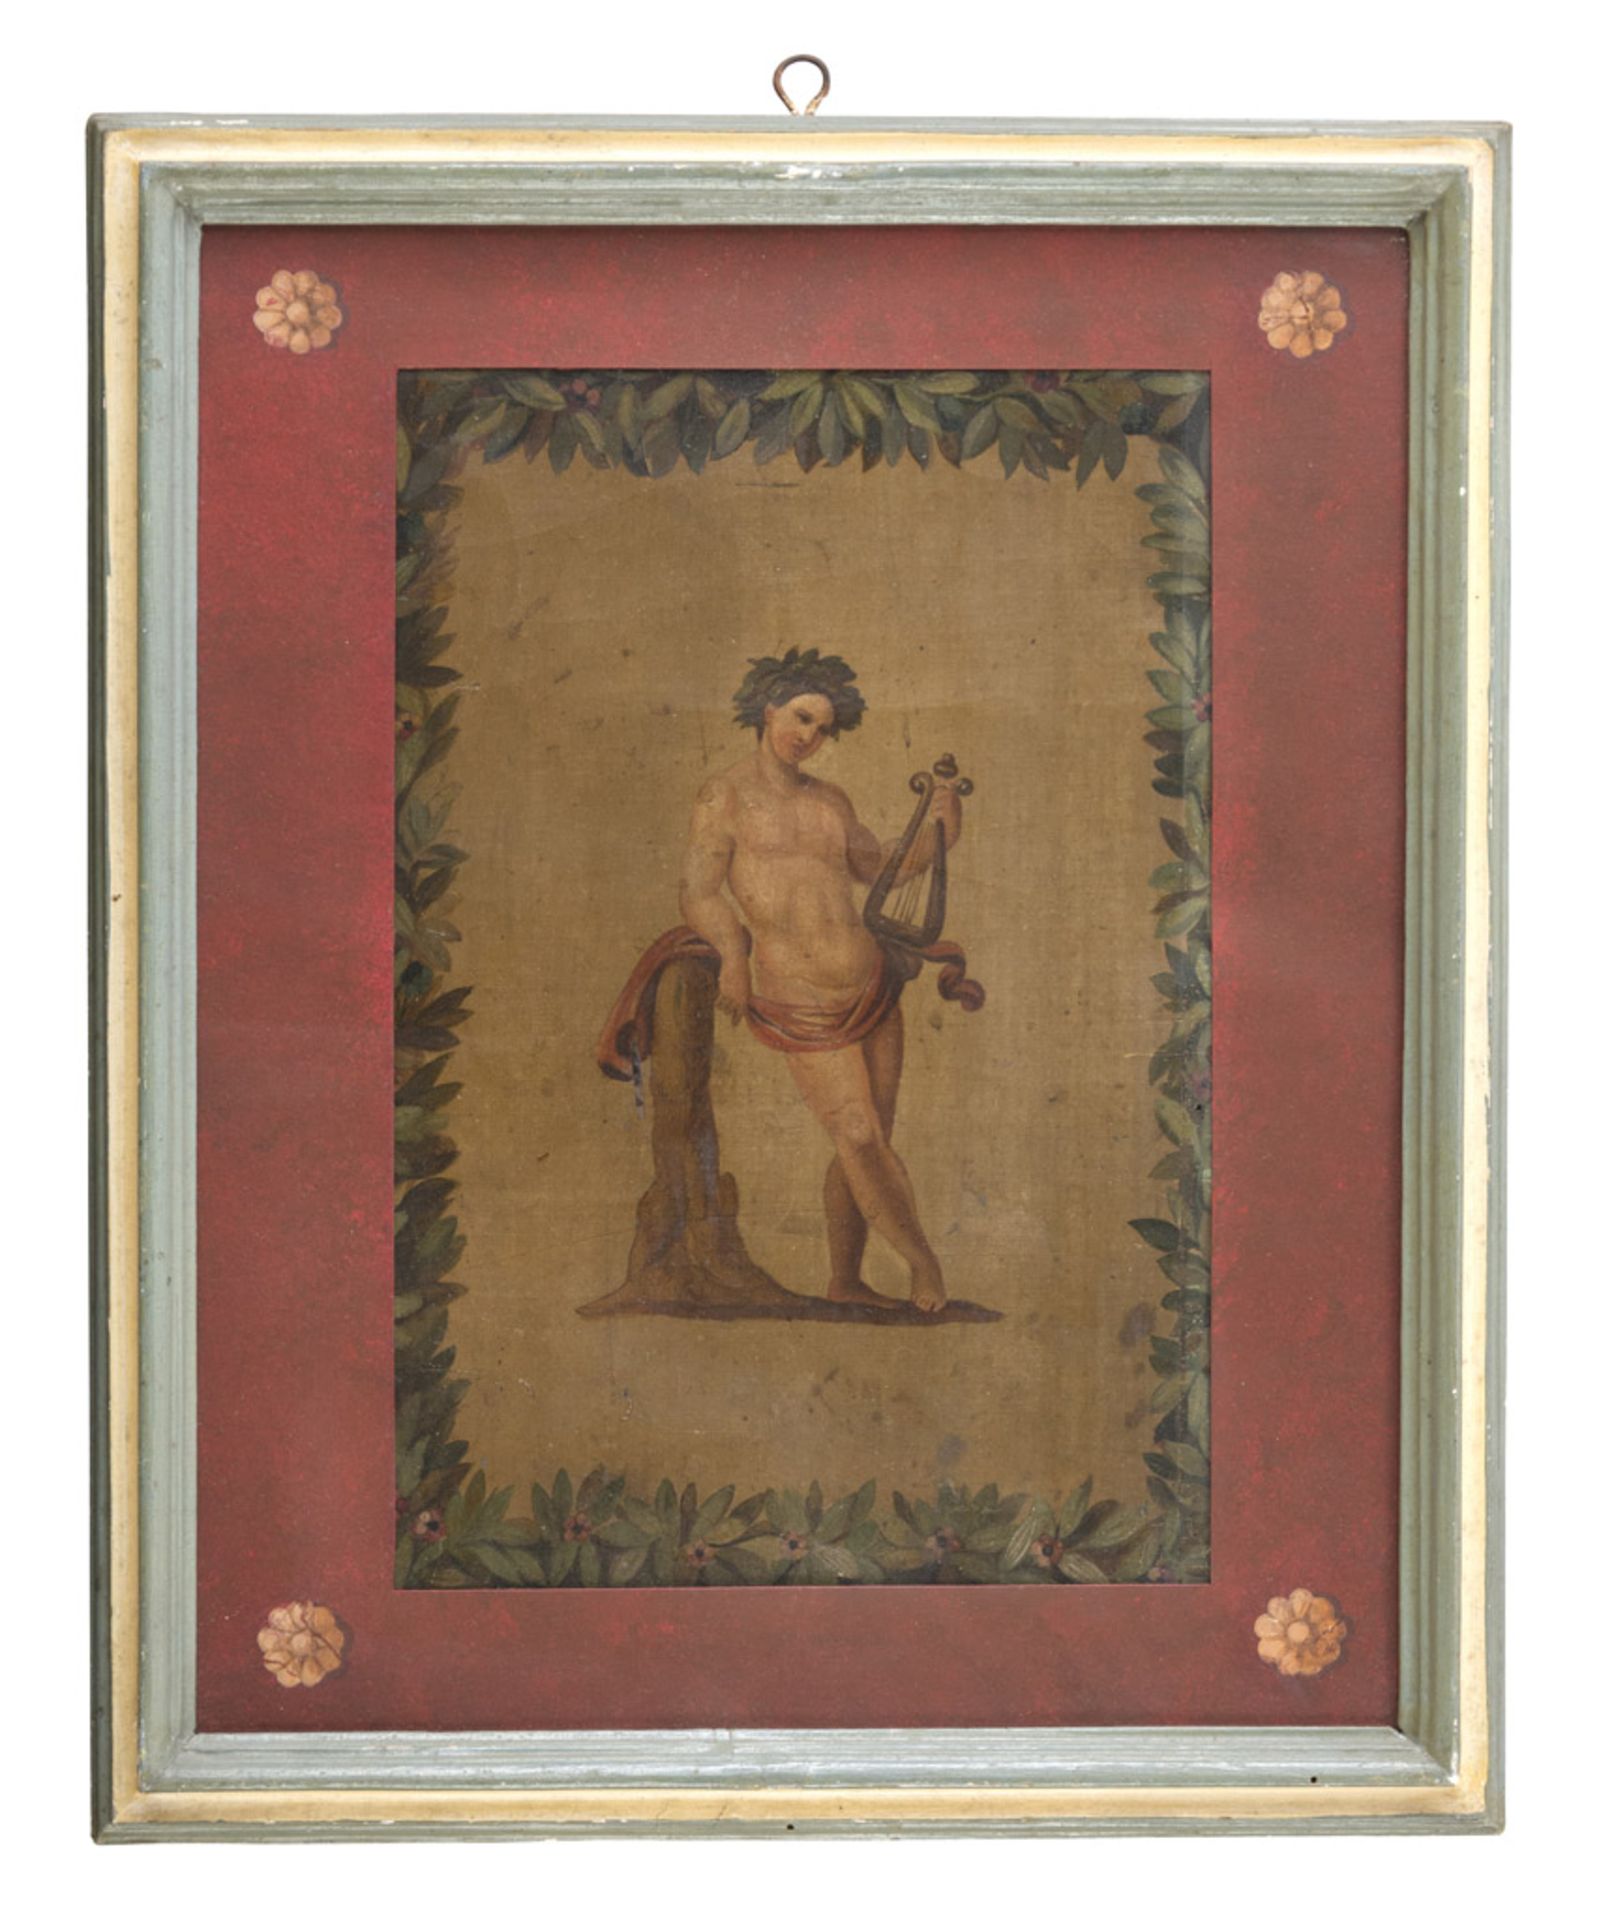 ITALIAN PAINTER, 19TH CENTURY DIONYSUS APOLLO PSYCHE PSYCHE Four oil paintings on canvas, cm. 32 x - Image 4 of 4